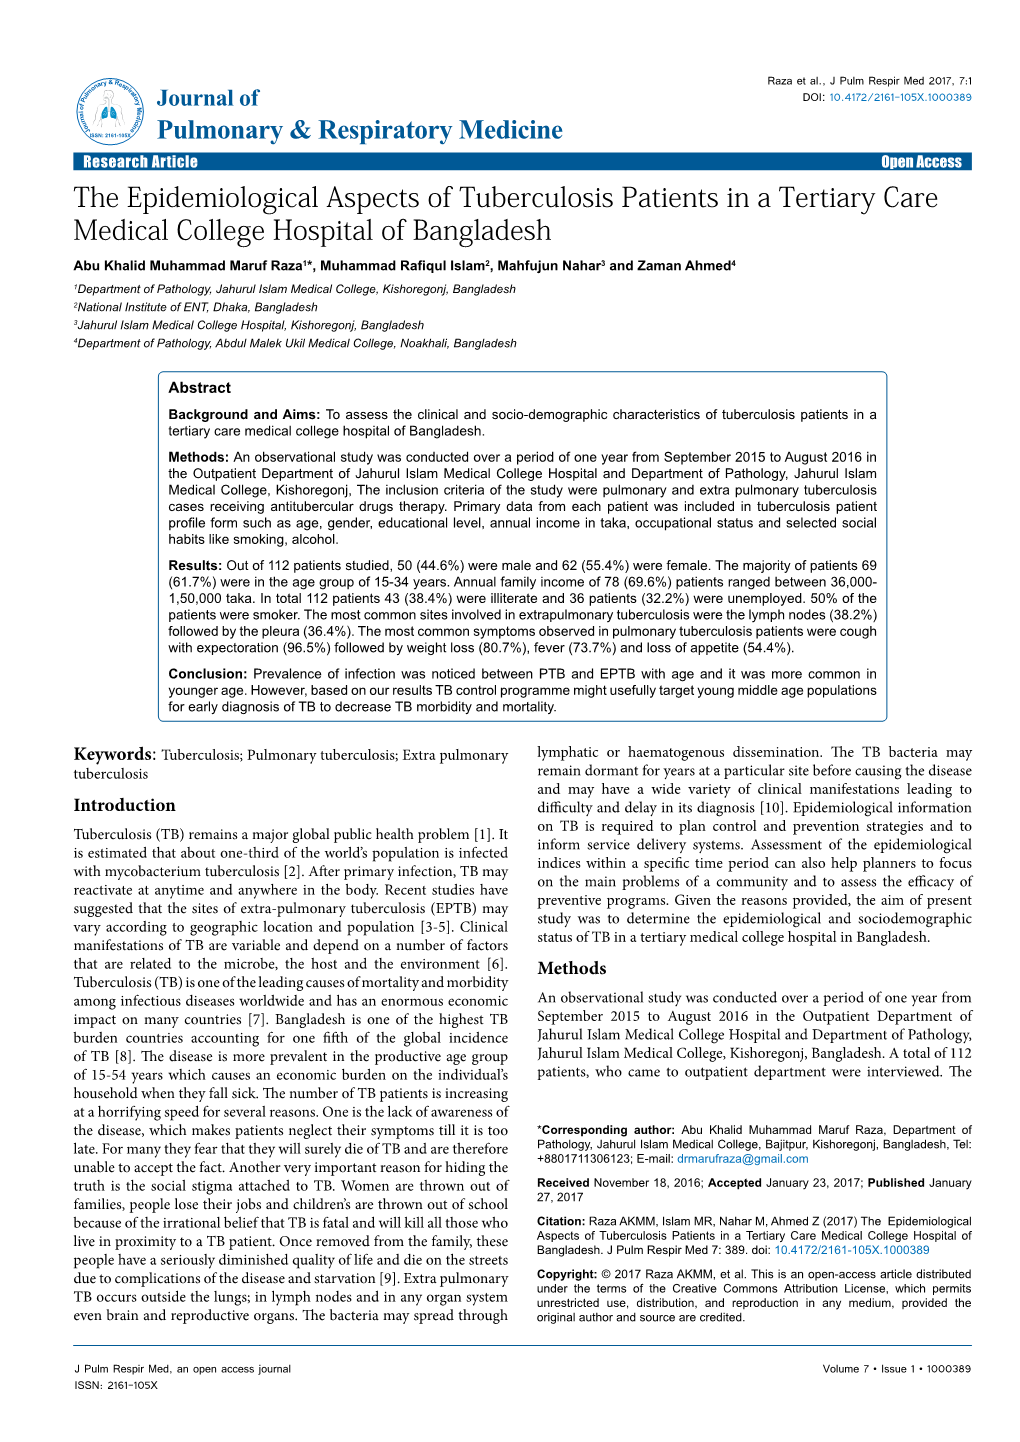 The Epidemiological Aspects of Tuberculosis Patients in a Tertiary Care Medical College Hospital of Bangladesh